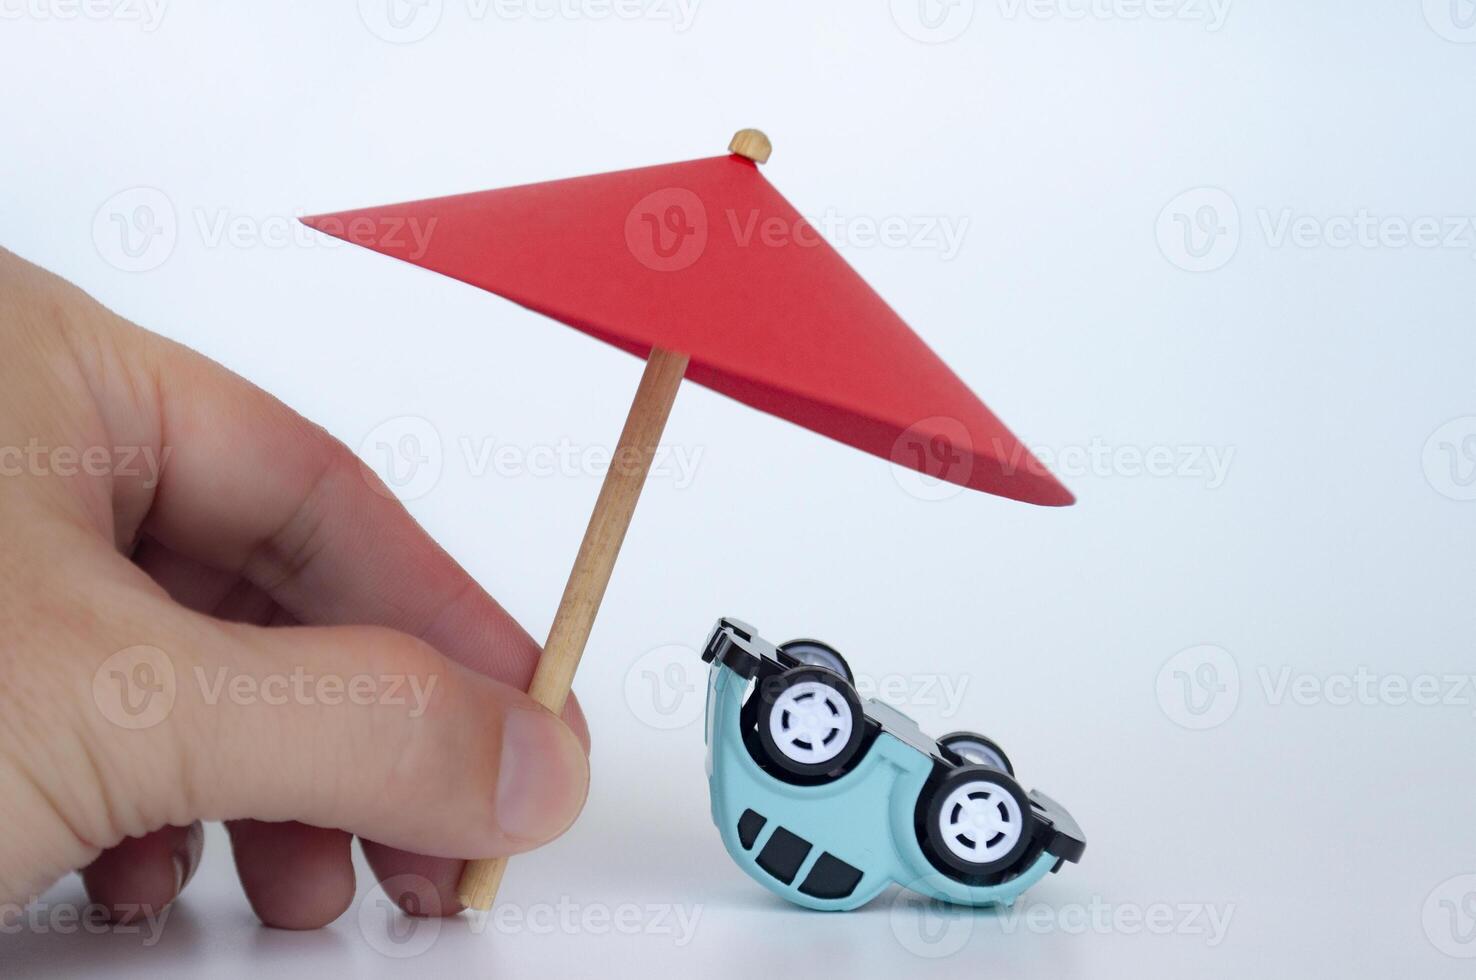 Red toy umbrella and upside down blue toy car on white background photo